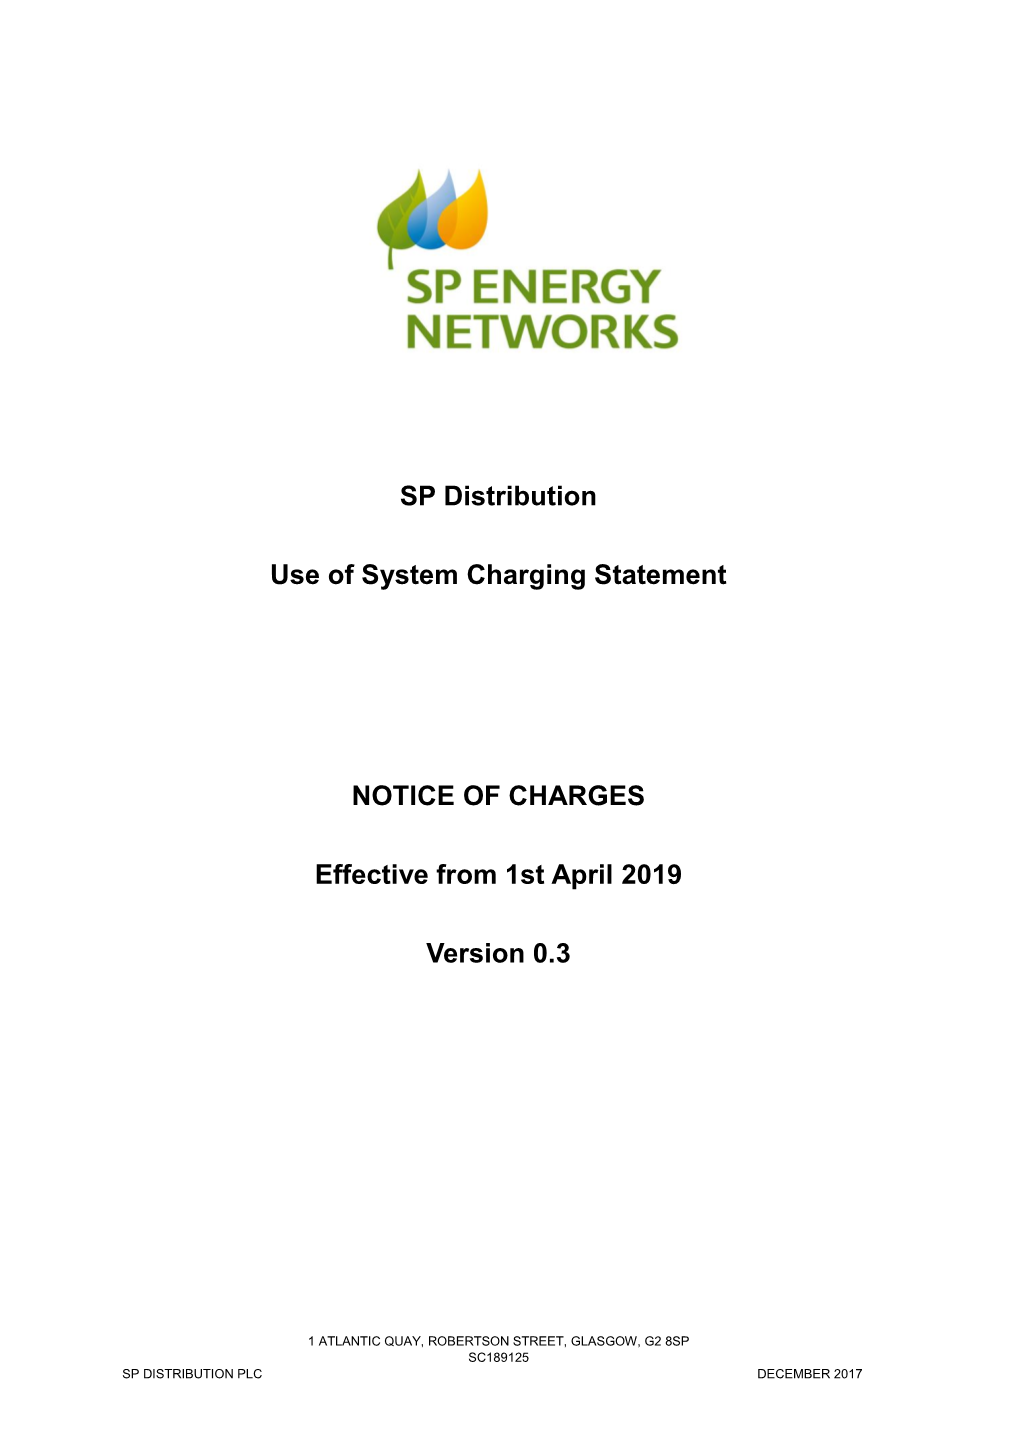 SP Distribution Use of System Charging Statement NOTICE of CHARGES Effective from 1St April 2019 Version